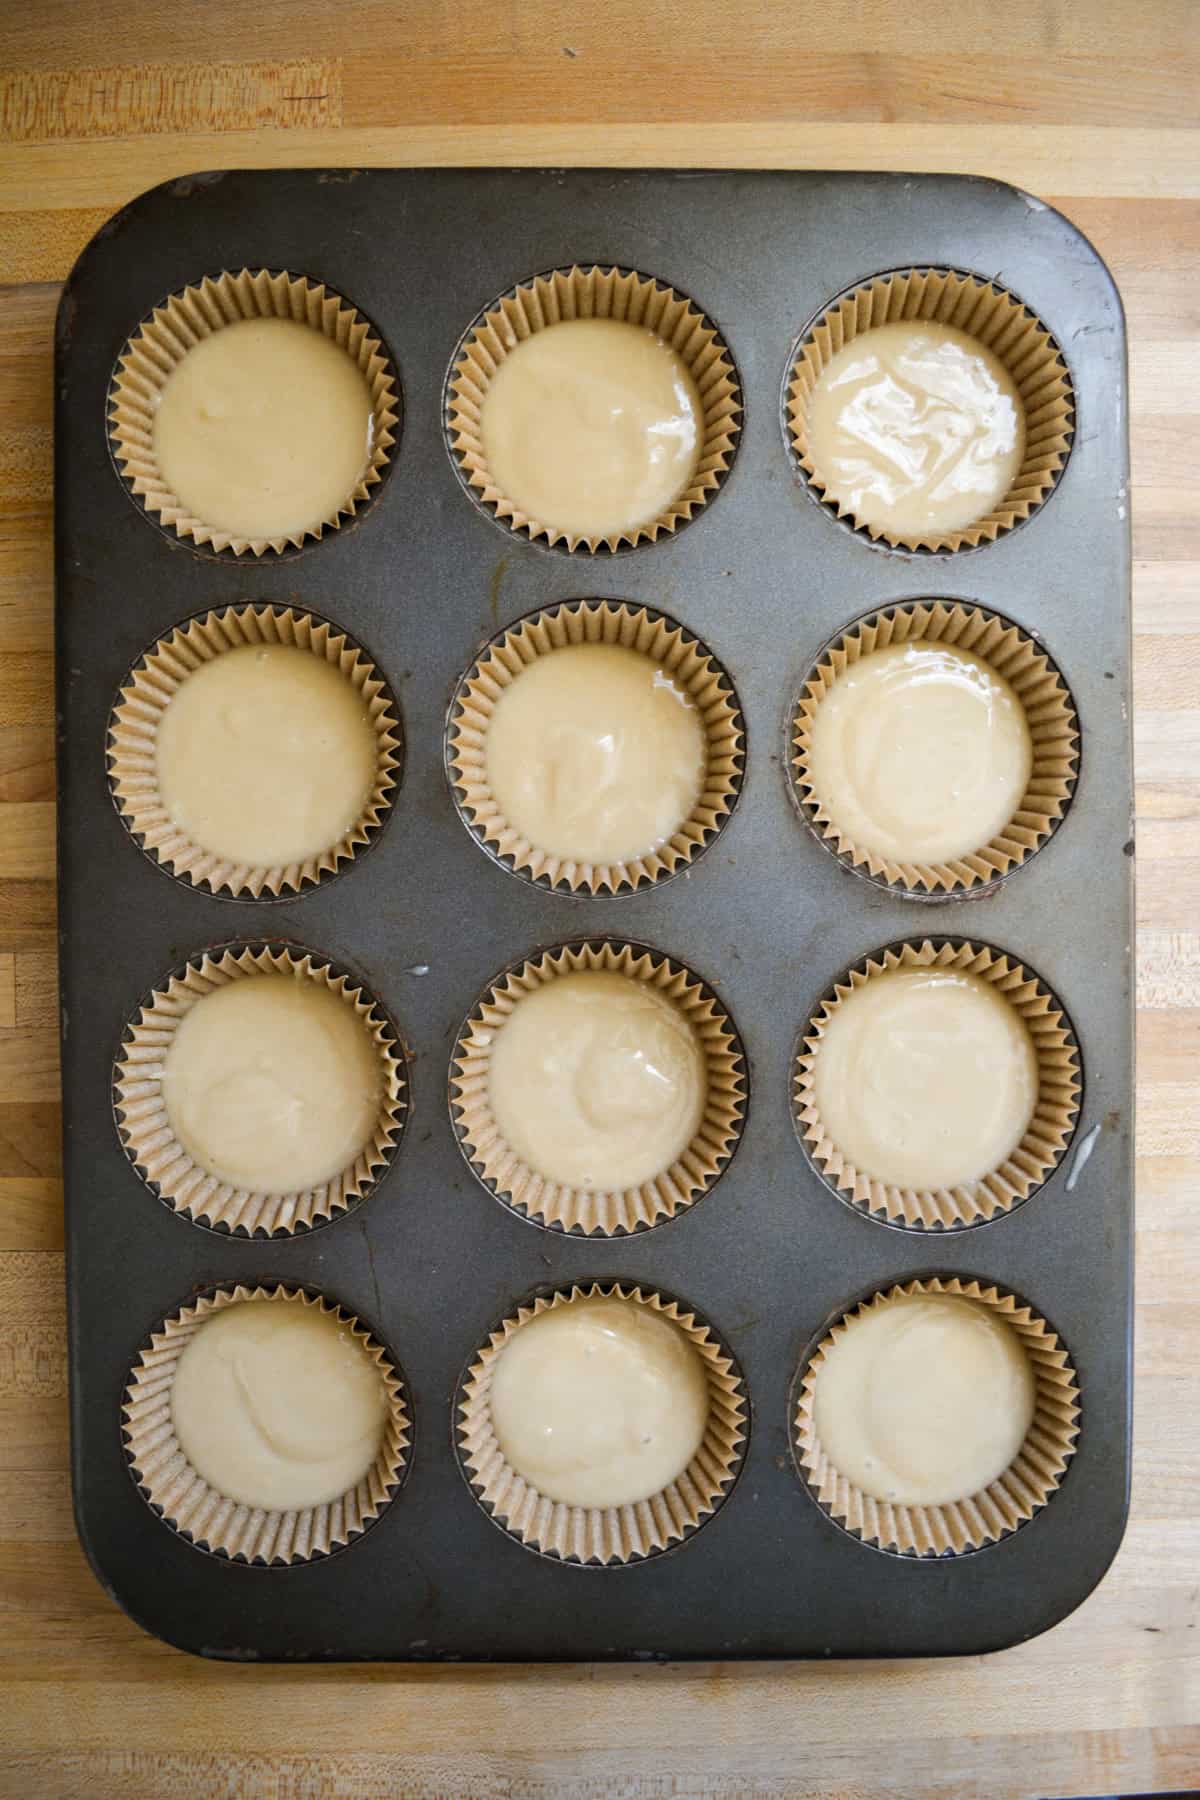 Cupcake batter is portioned into a lined cupcake tin.